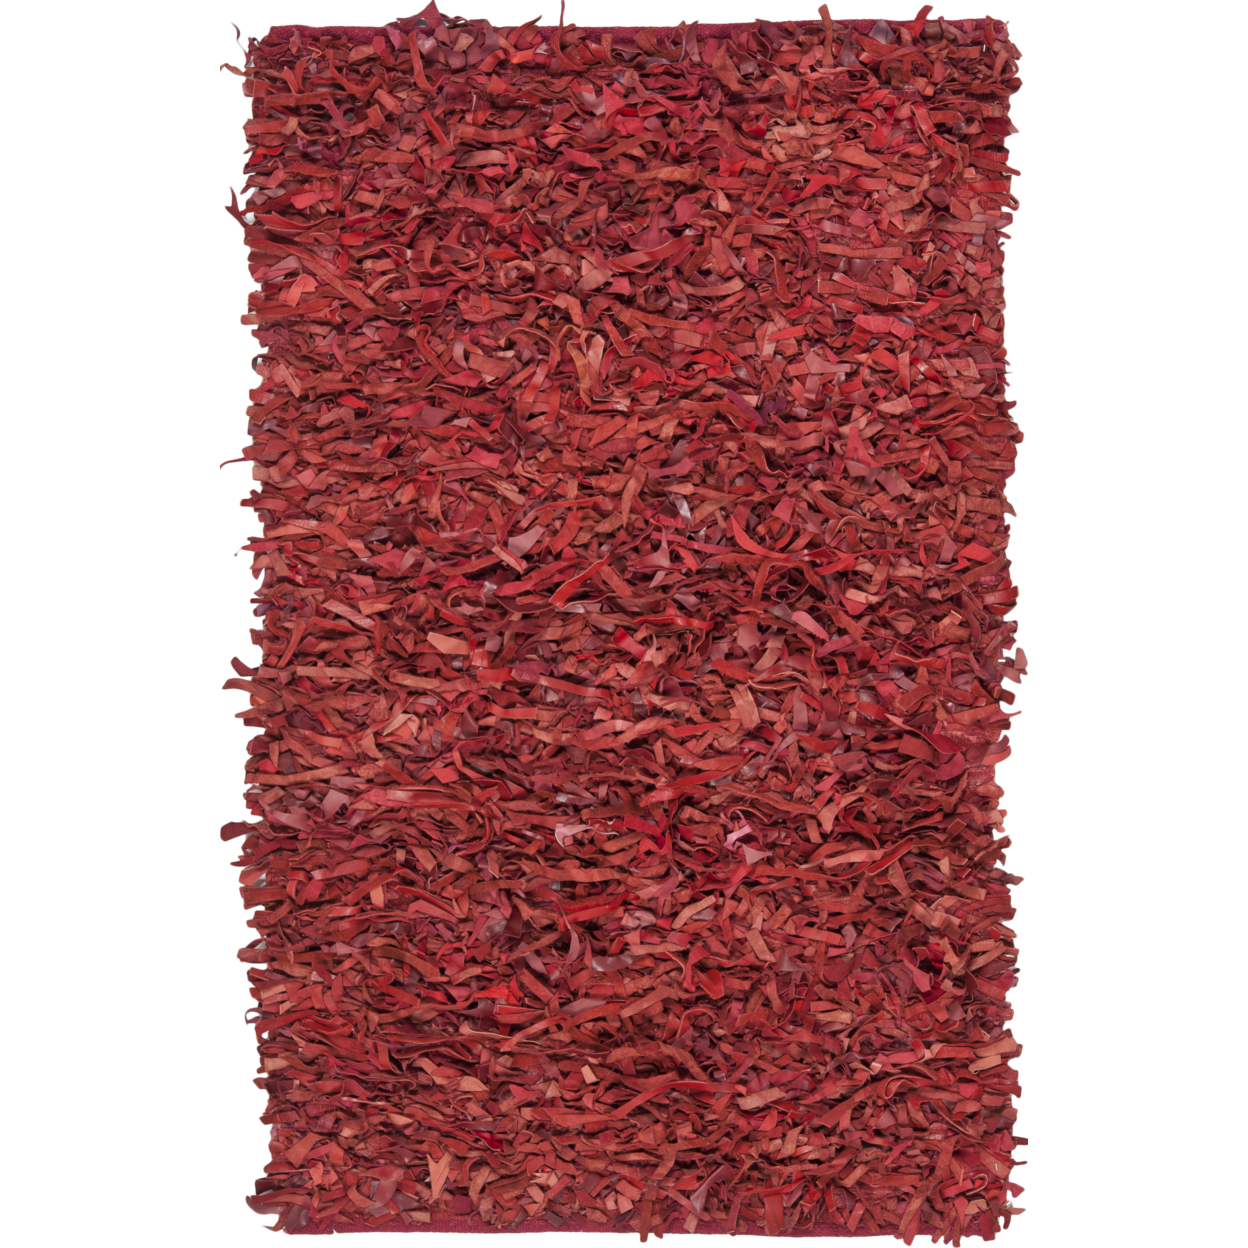 SAFAVIEH Leather Shag LSG511D Hand-knotted Red Rug - 6' Square